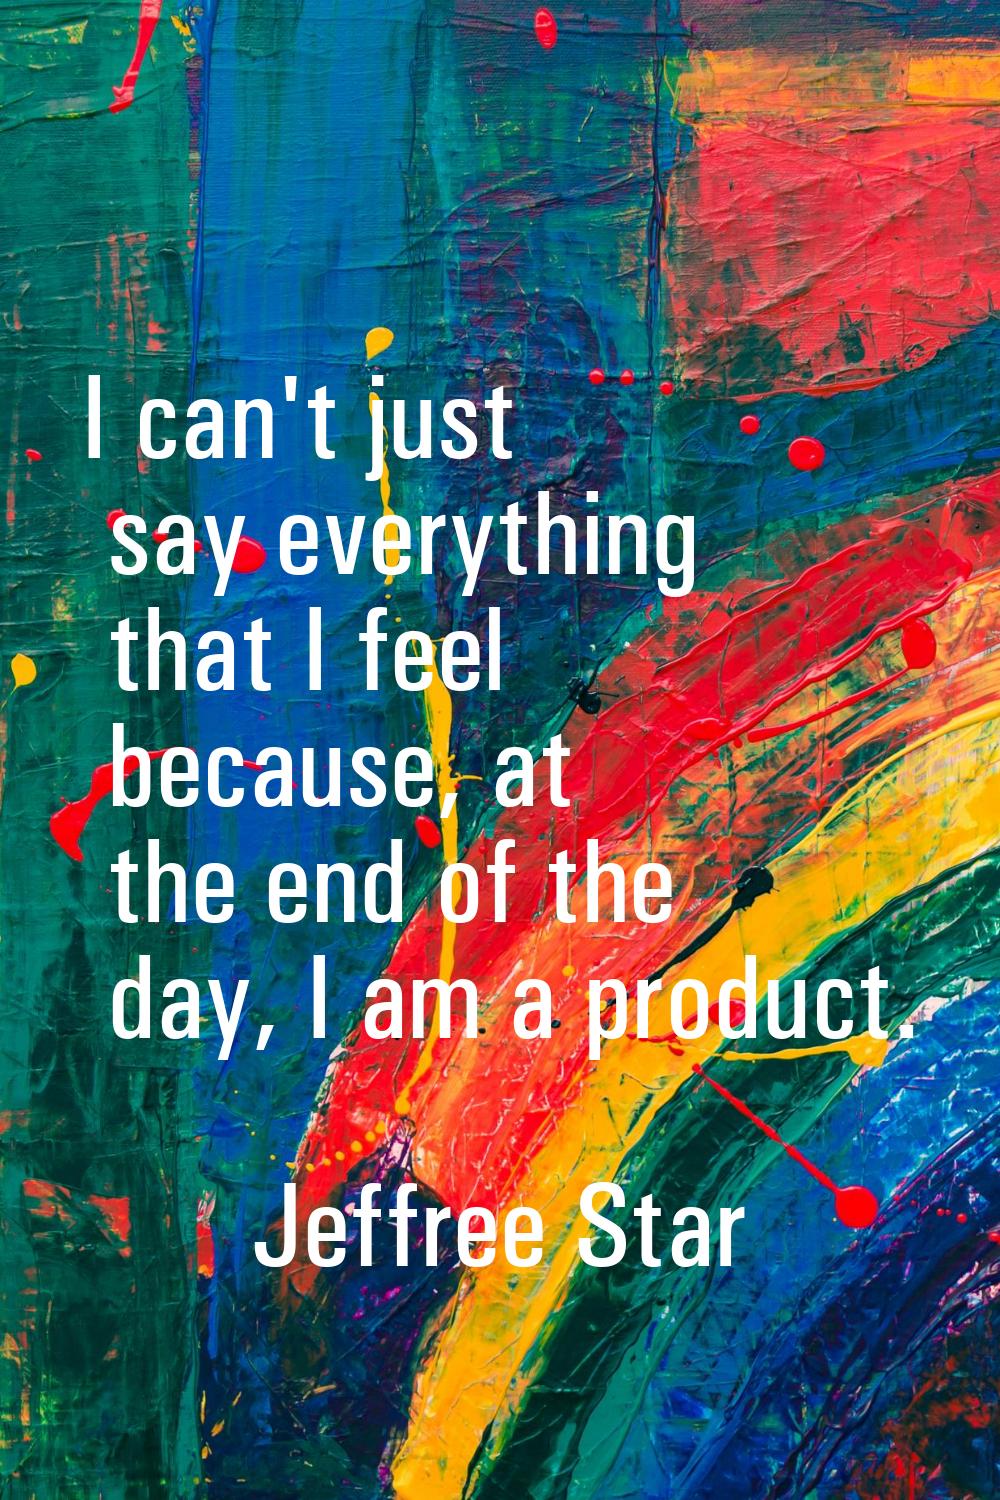 I can't just say everything that I feel because, at the end of the day, I am a product.